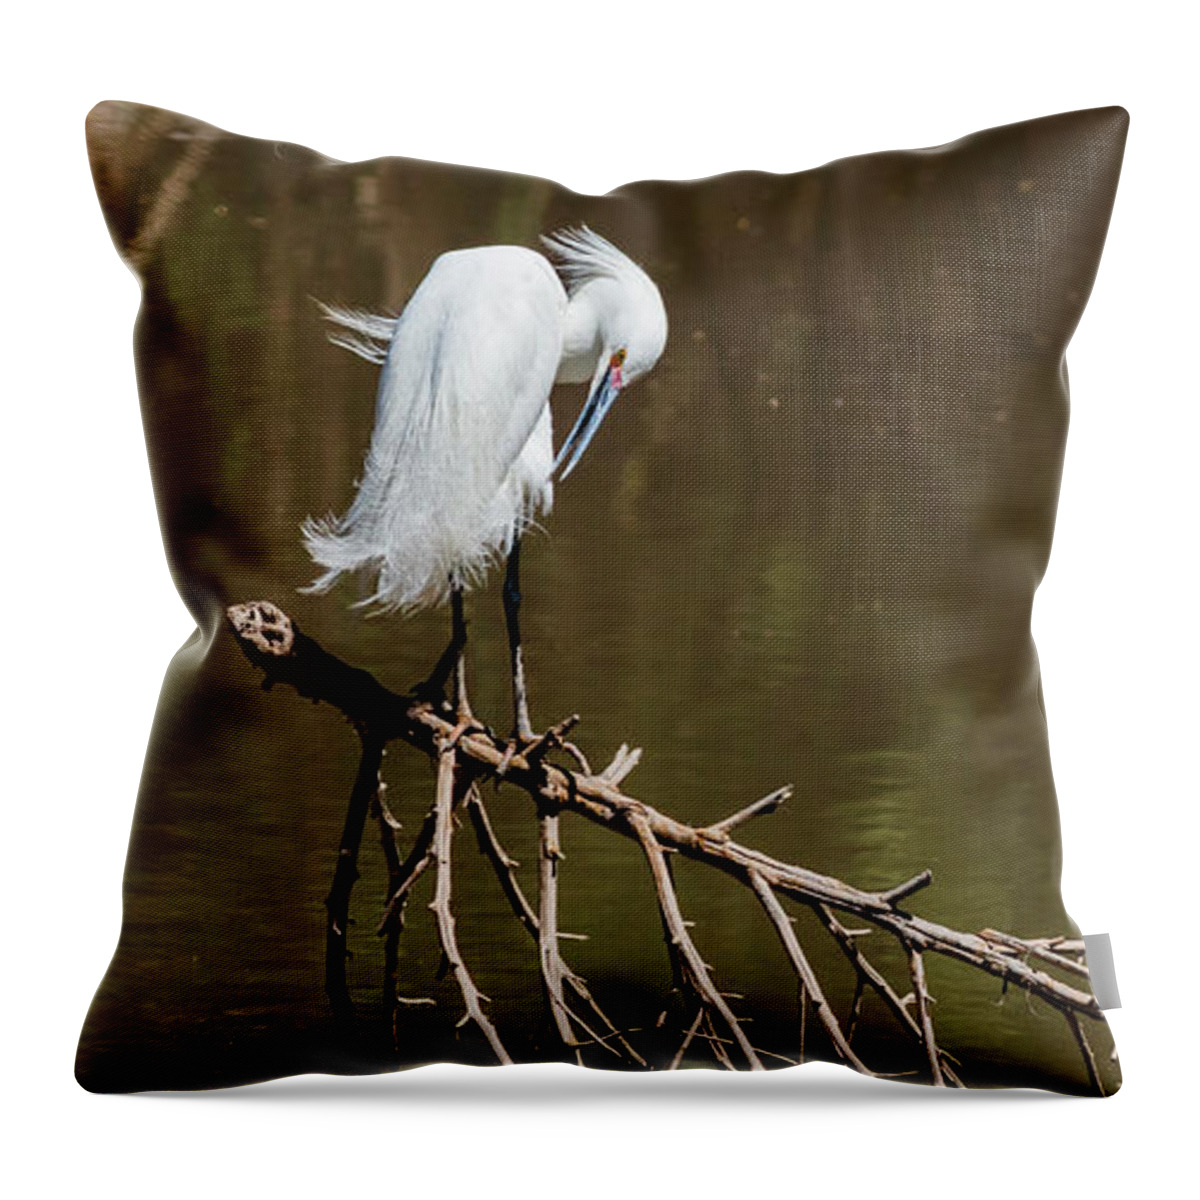 2015 May Throw Pillow featuring the photograph All Preened And Pretty by Bill Kesler